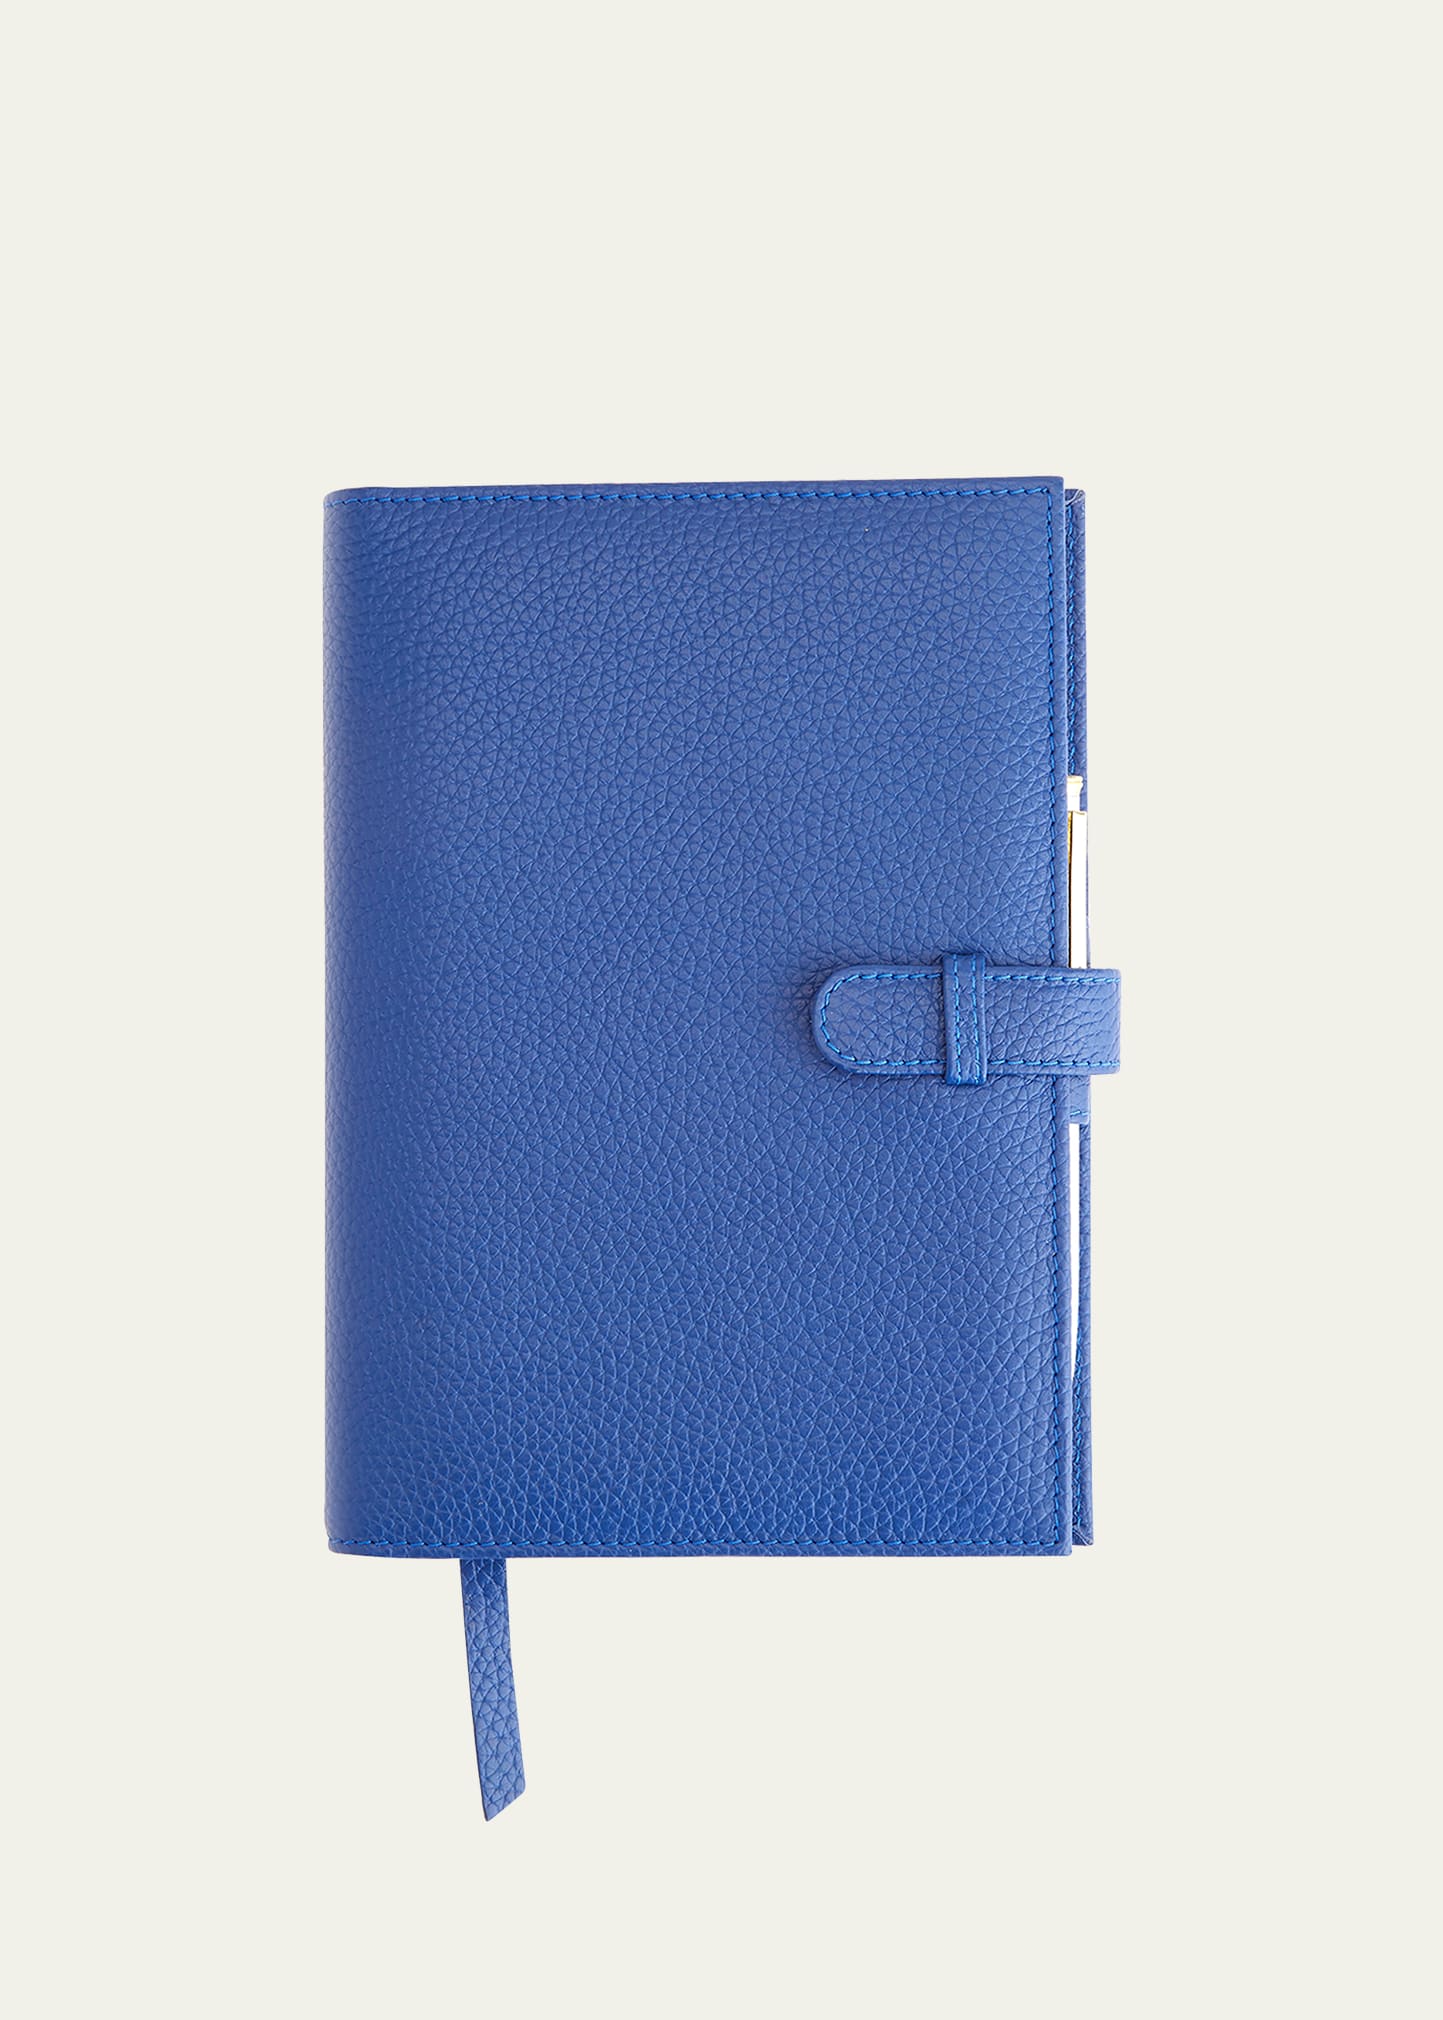 Personalized Executive Leather Daily Planner